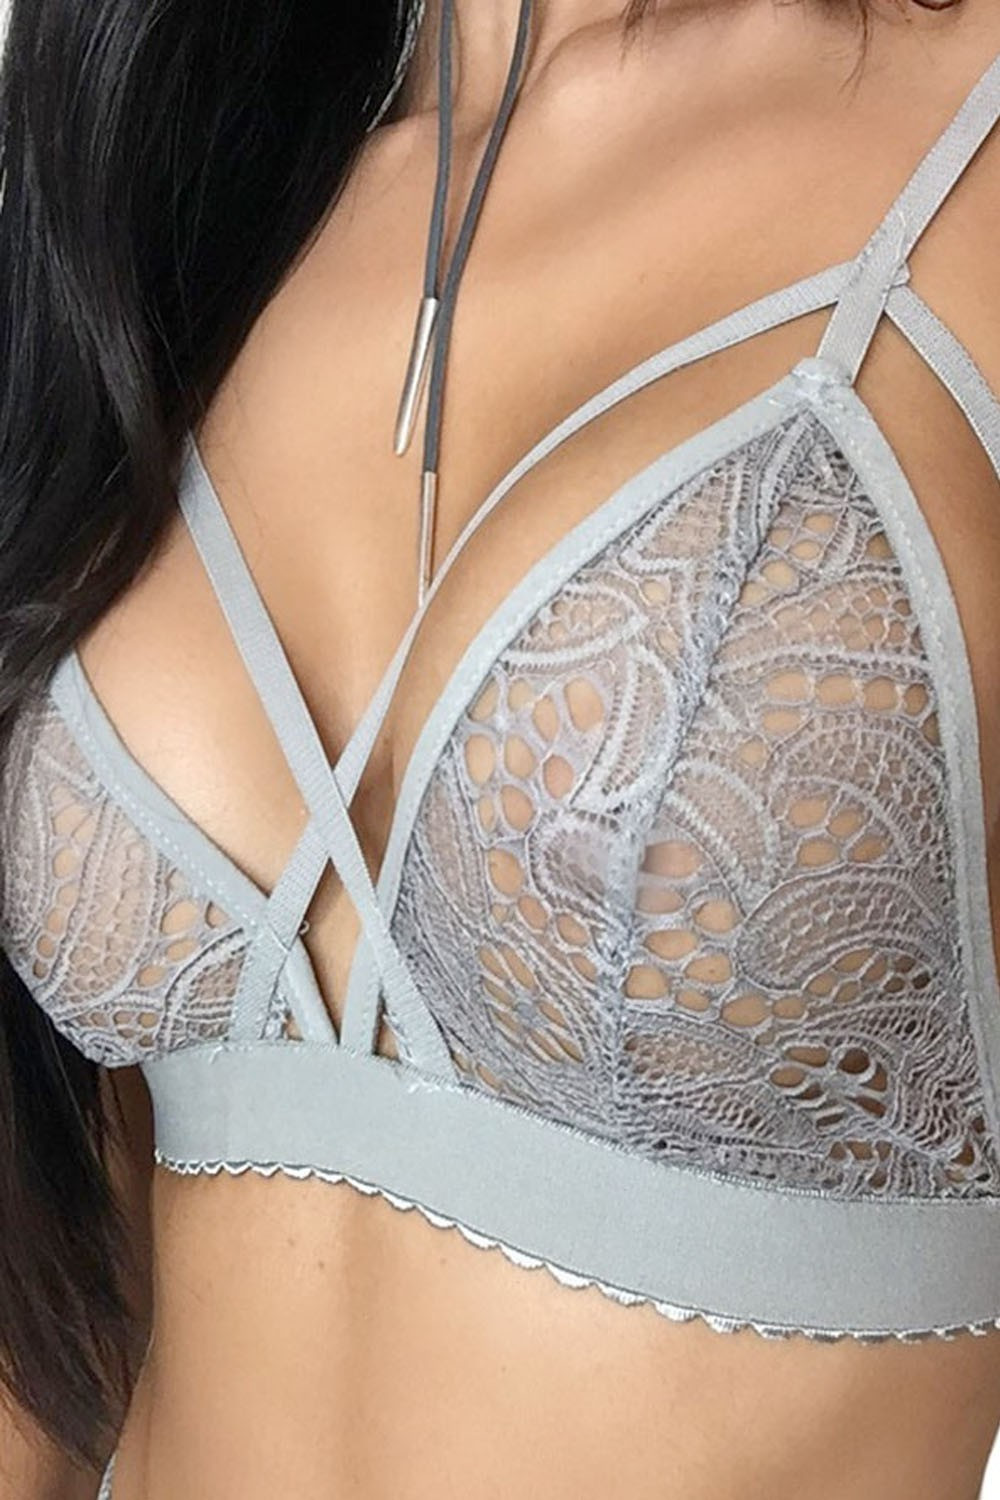 Sexy lingerie and underwear for women - Gray lace bralette